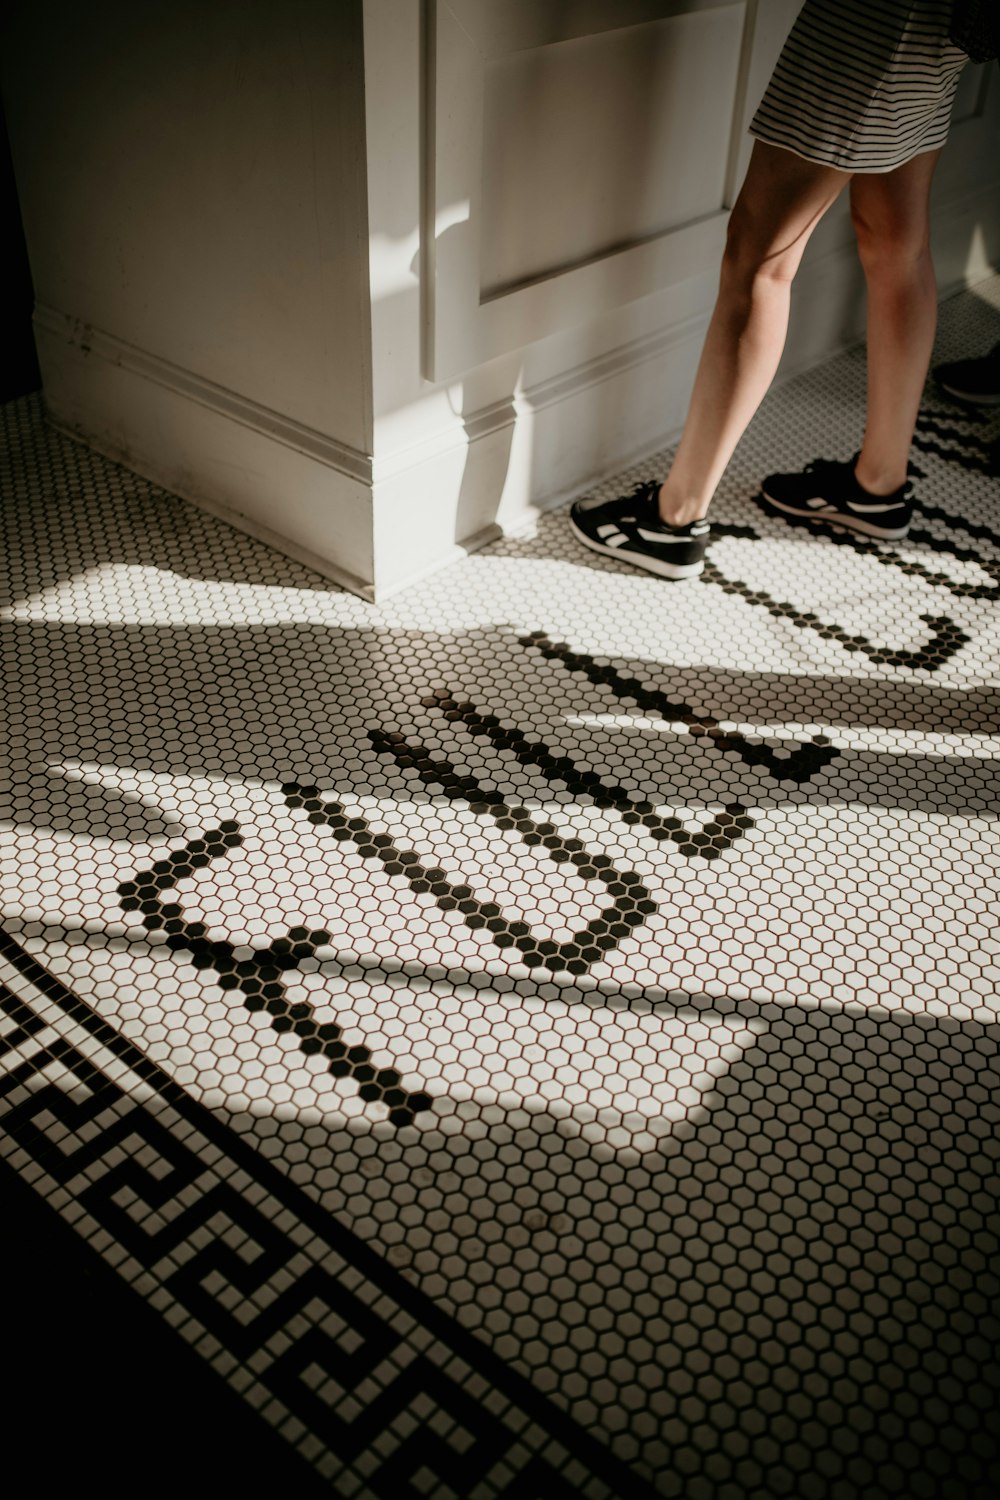 a woman standing on a tiled floor next to a doorway